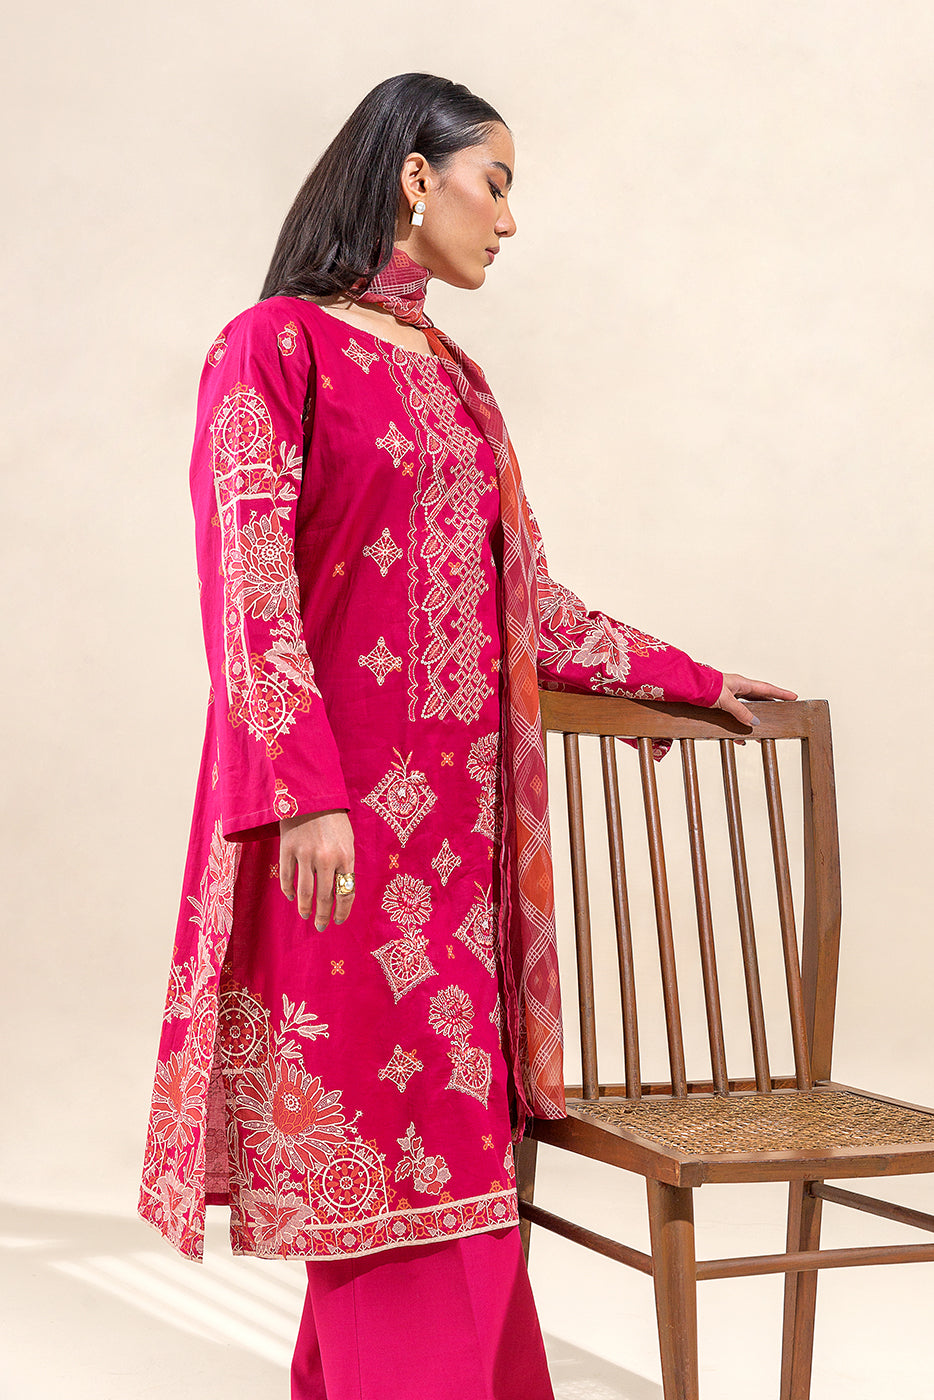 3 PIECE EMBROIDERED LAWN SUIT-SCARLET STONE (UNSTITCHED) - BEECHTREE